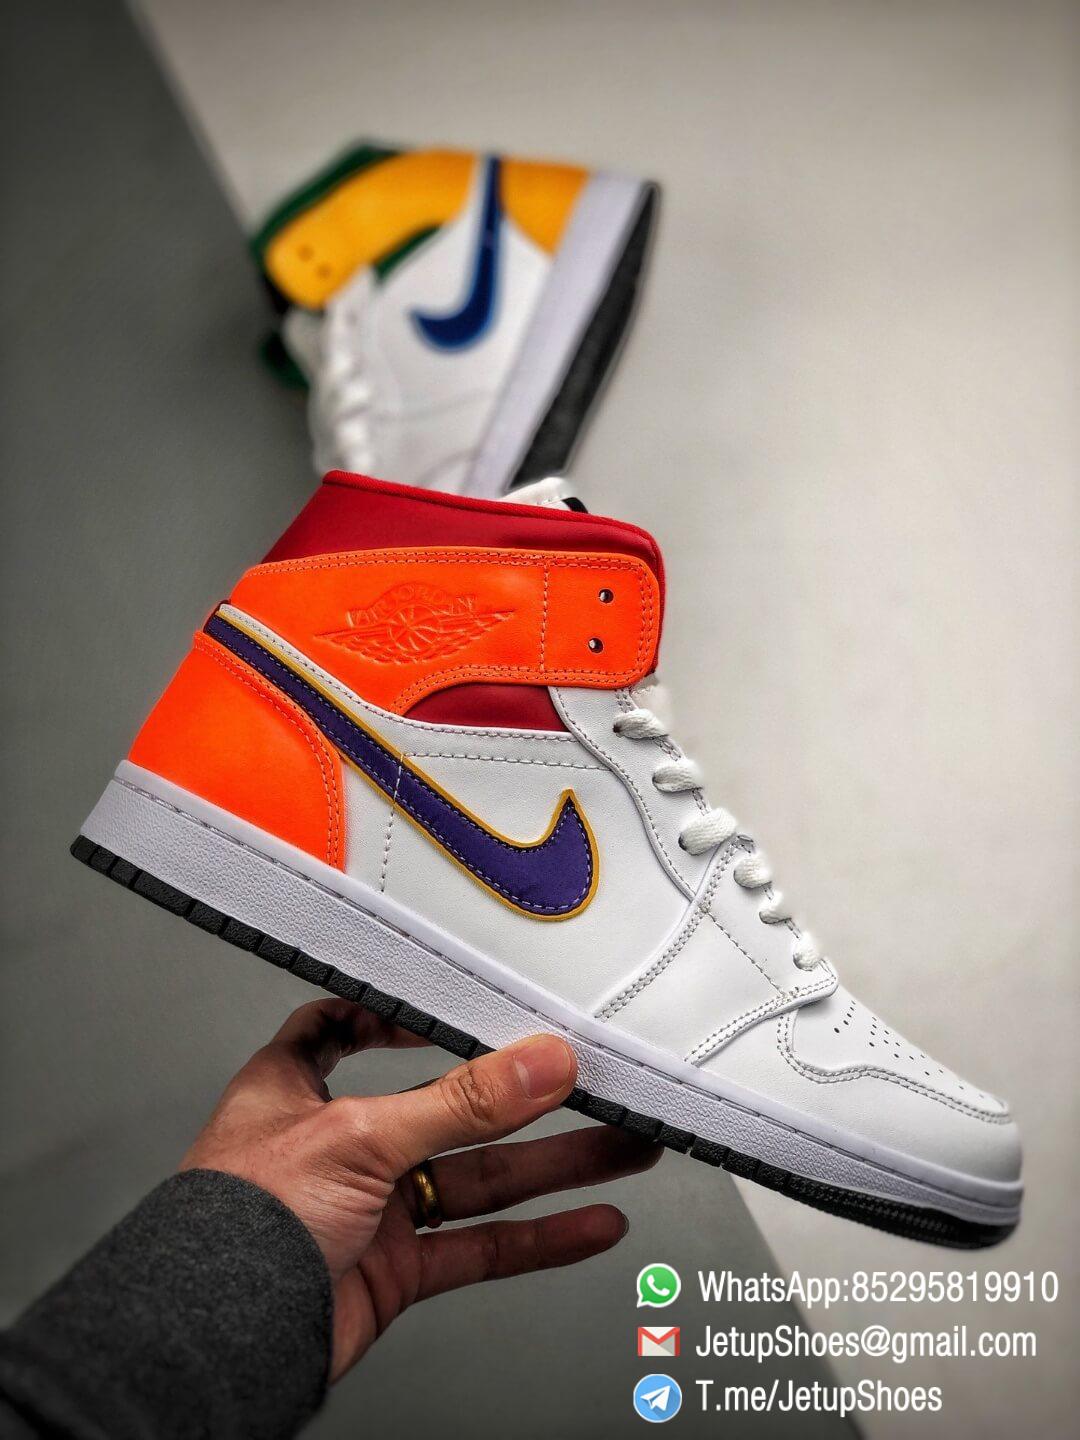 The Air Jordan 1 Mid GS White Court Purple Teal Repsneaker White Leather Upper Green Collar and Yellow Overlay 02